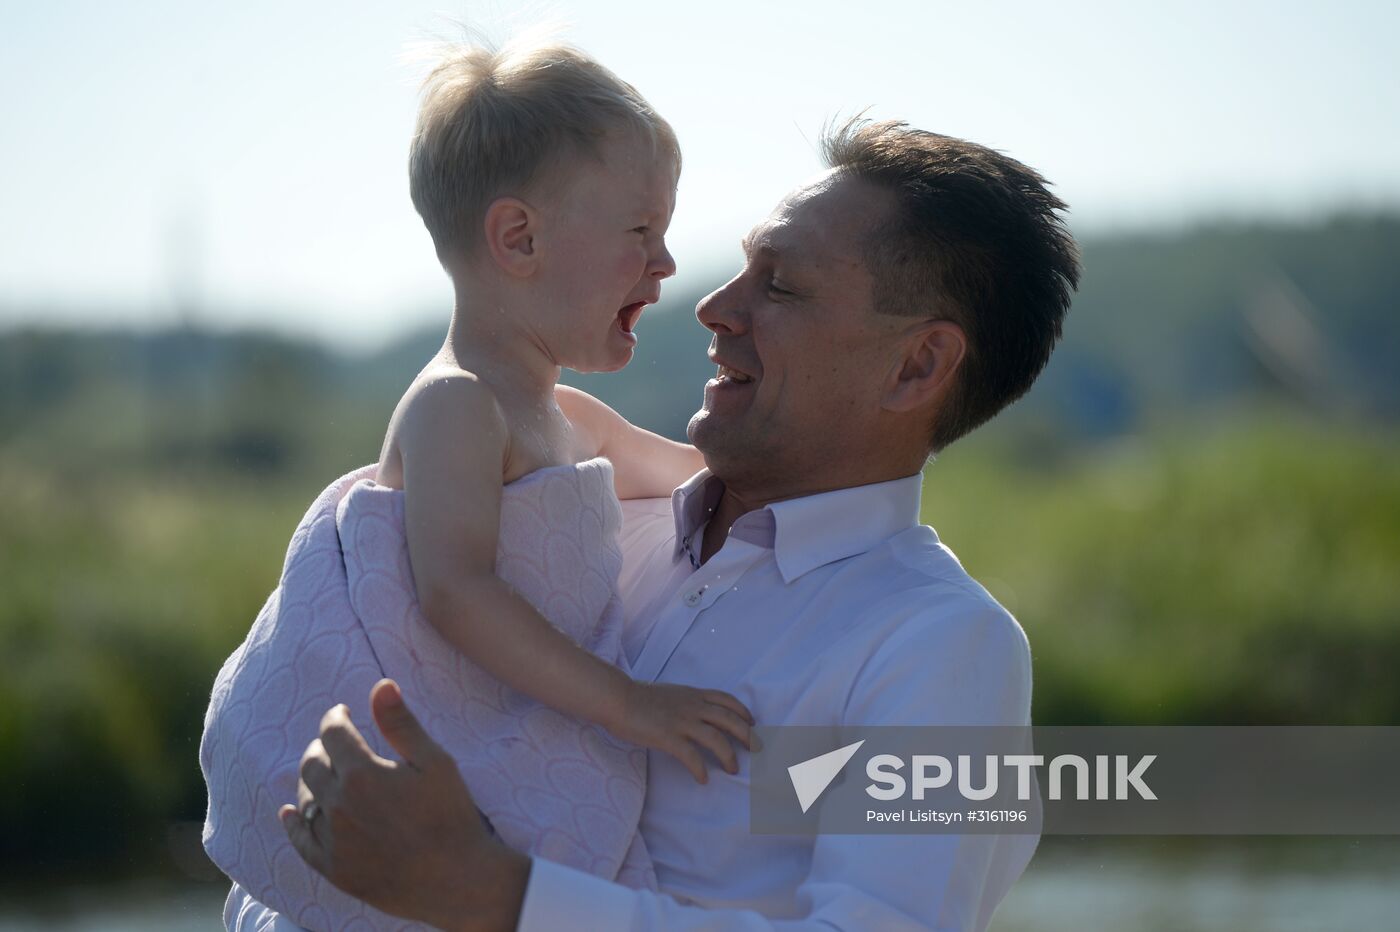 Baptism of Rus celebrated across Russia